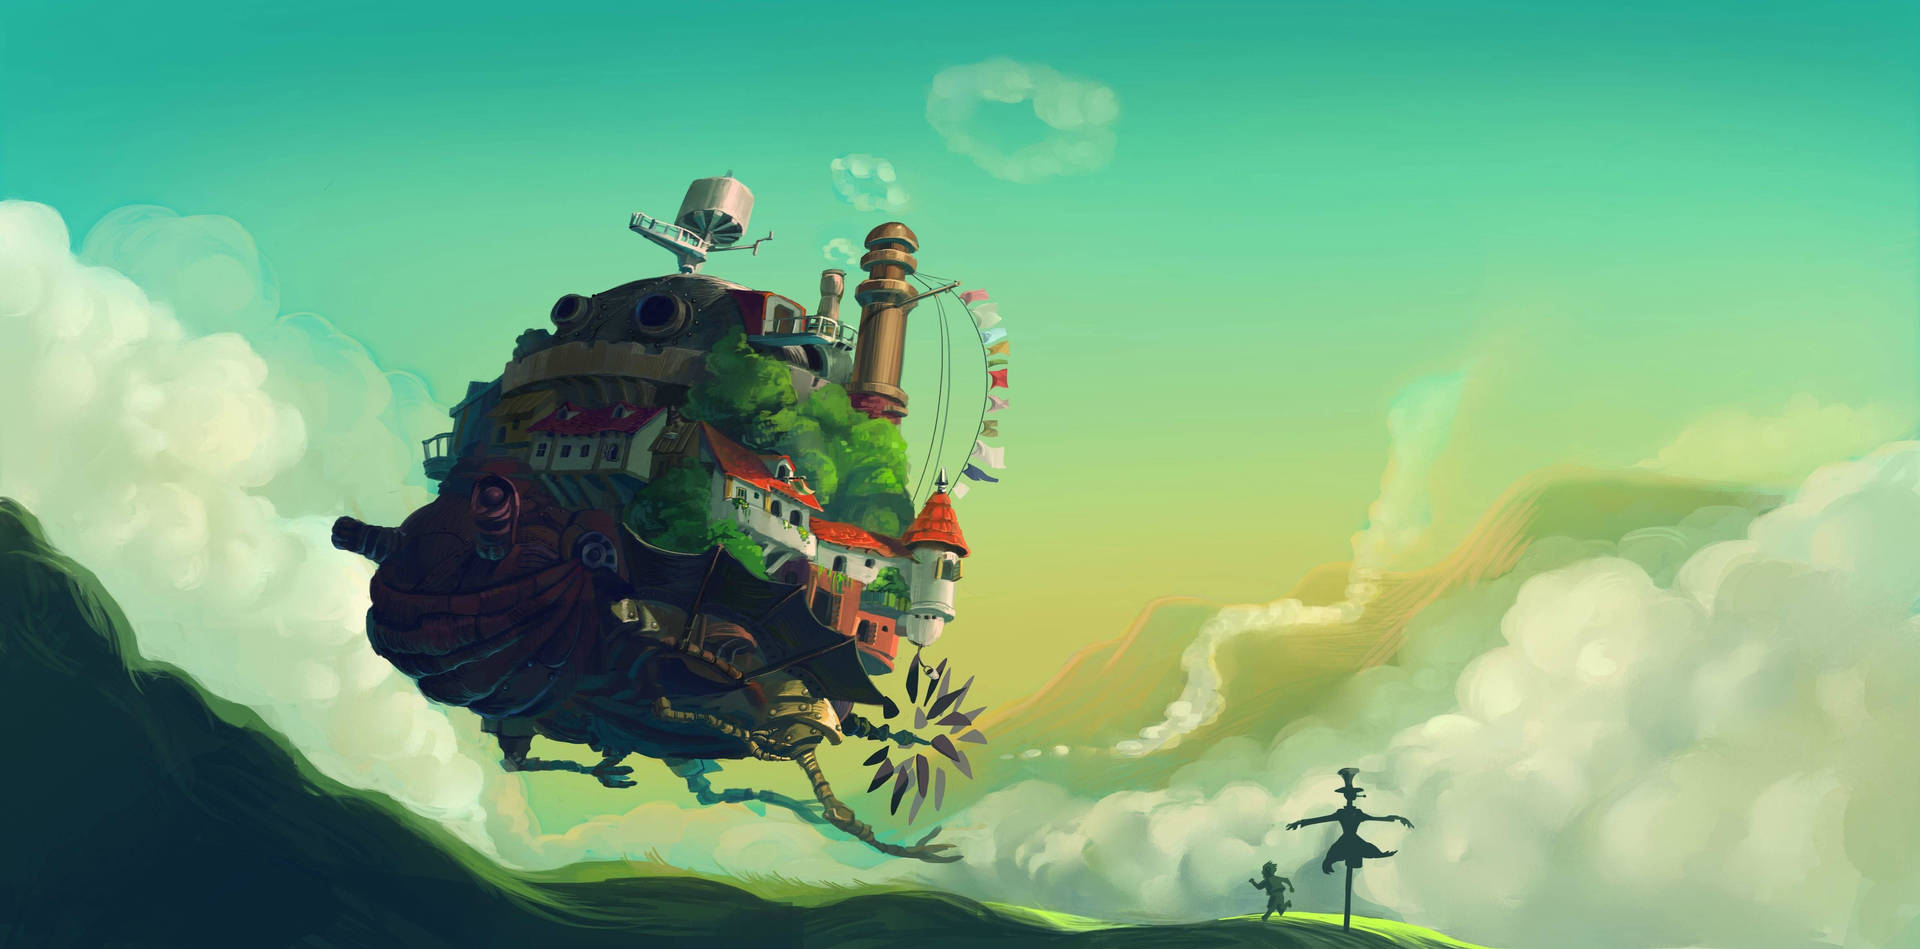 A magical adventure awaits: Howl's Moving Castle Wallpaper